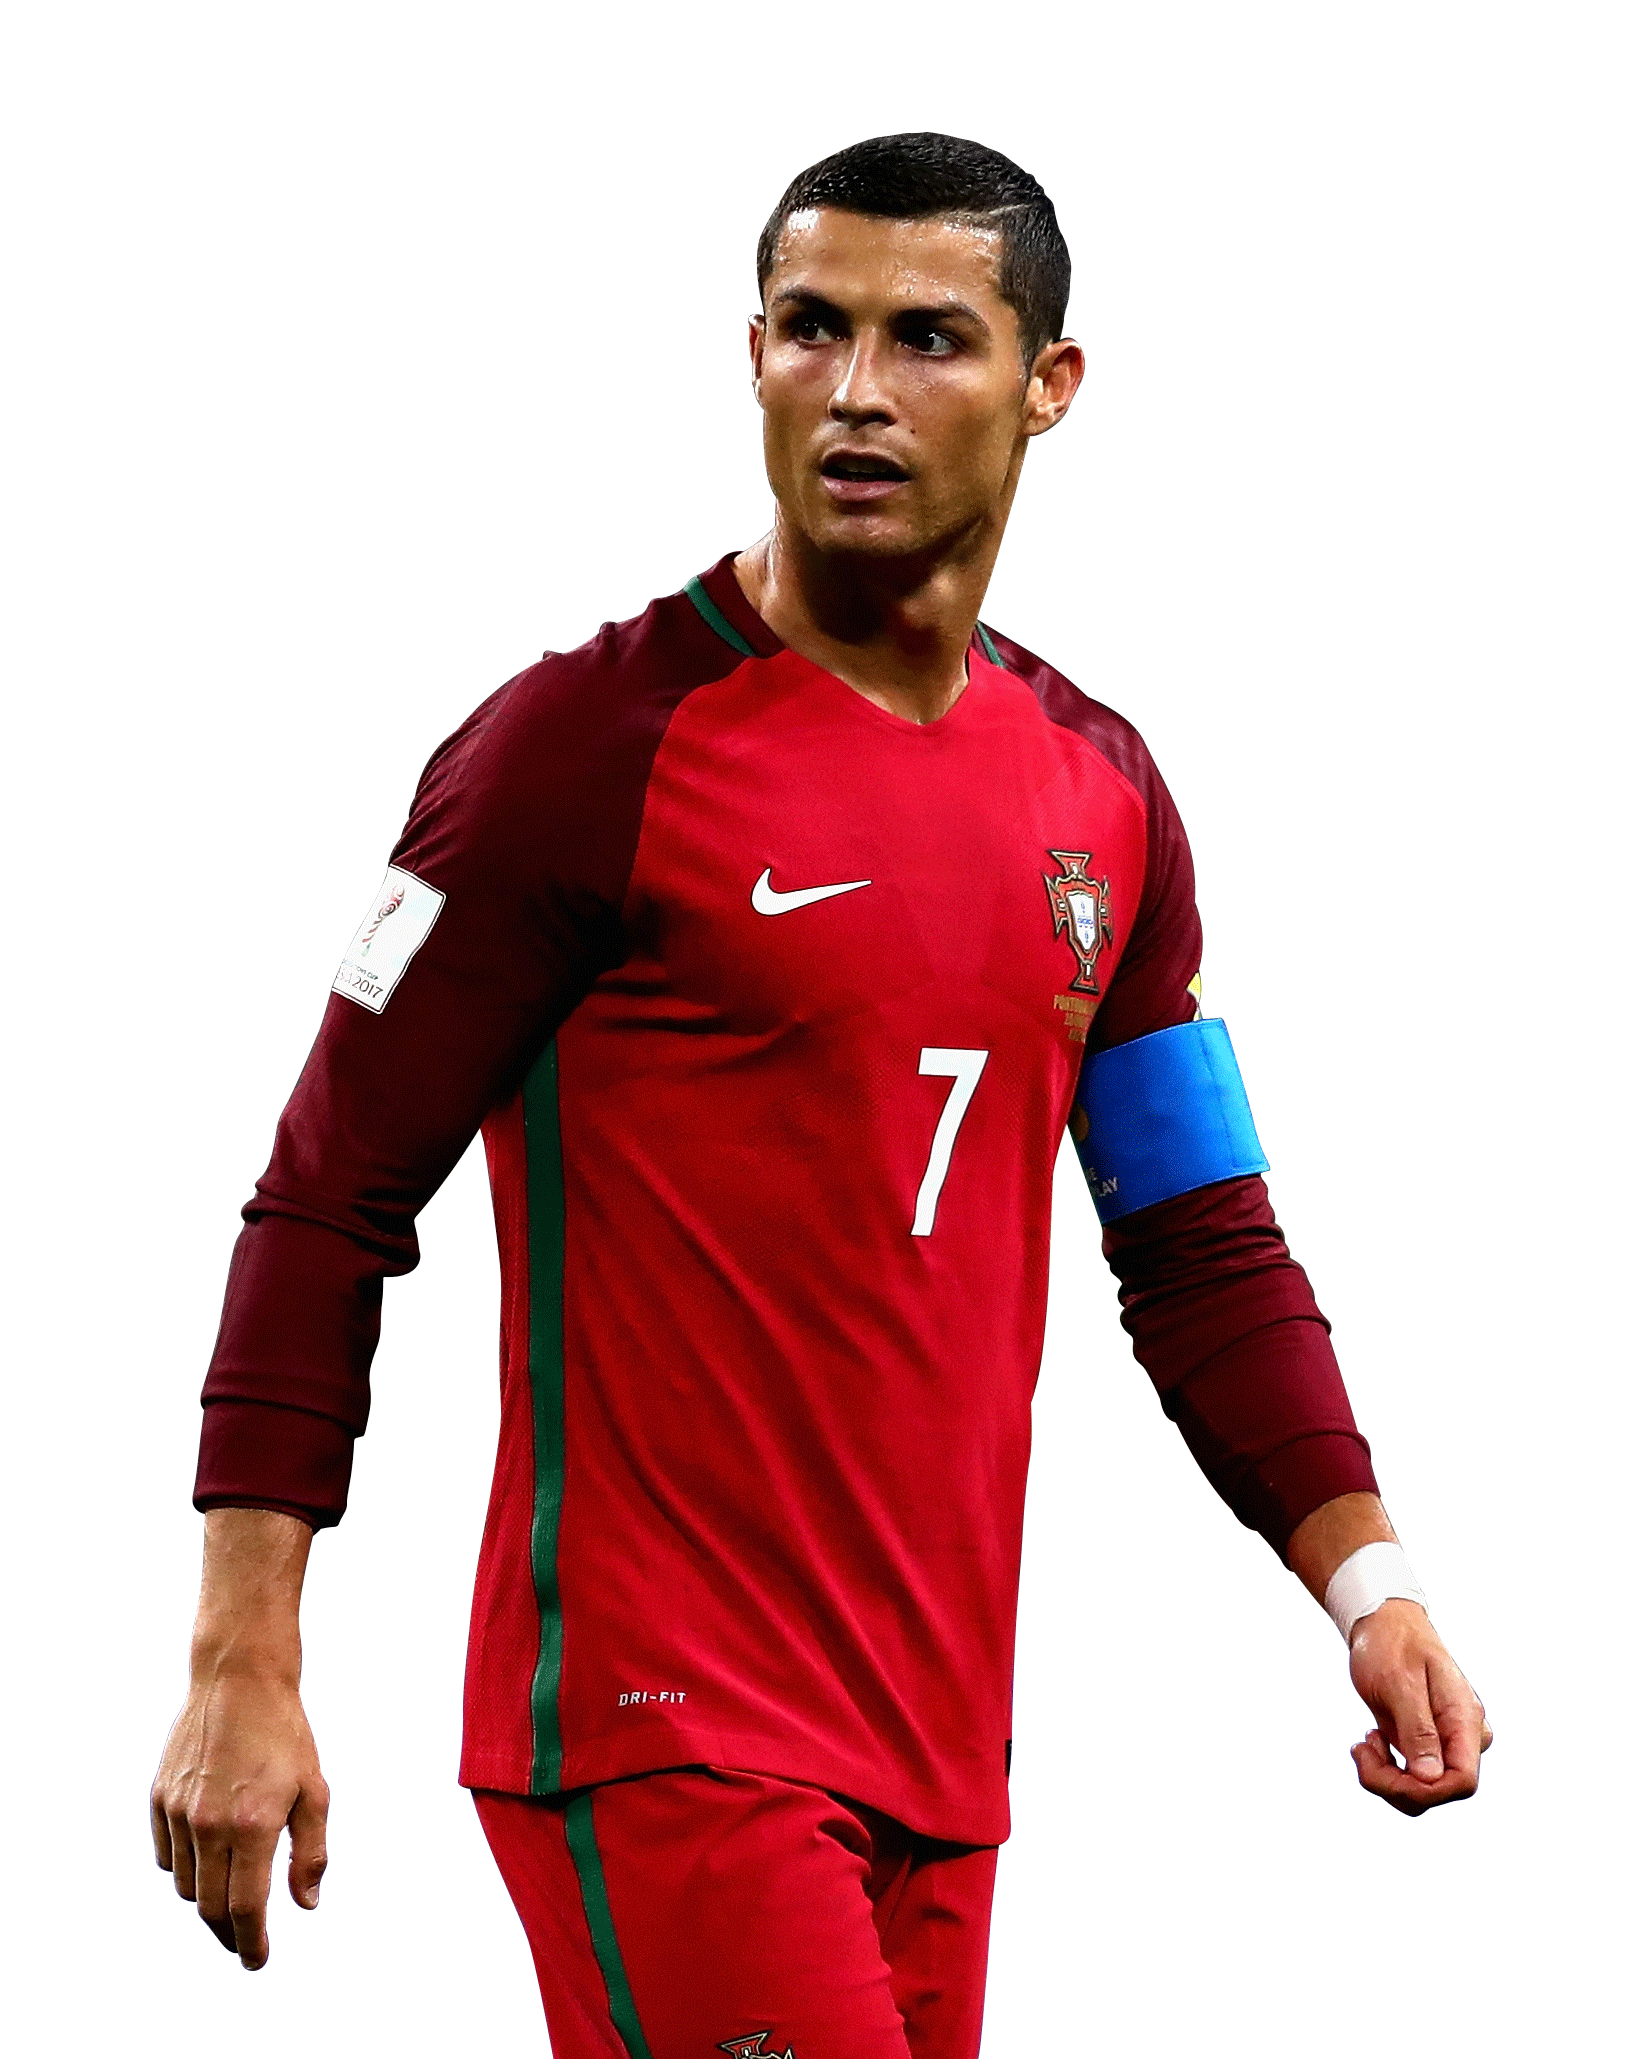 Cristiano Ronaldo PNG Background - PNG Play